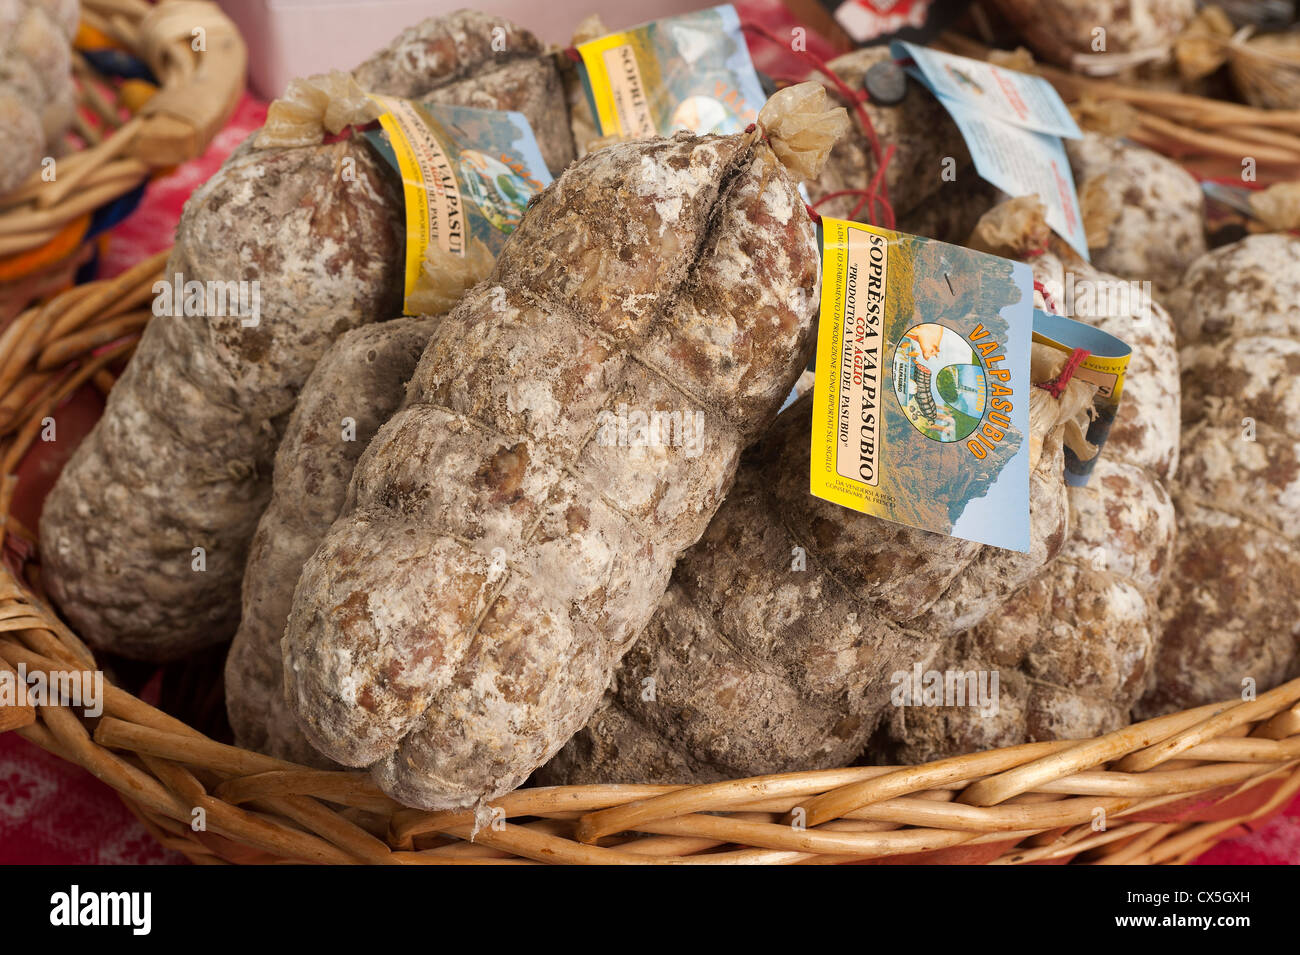 Sopressa, Typical Product of Veneto, Displayed in a Food Market. Rome, Italy Stock Photo